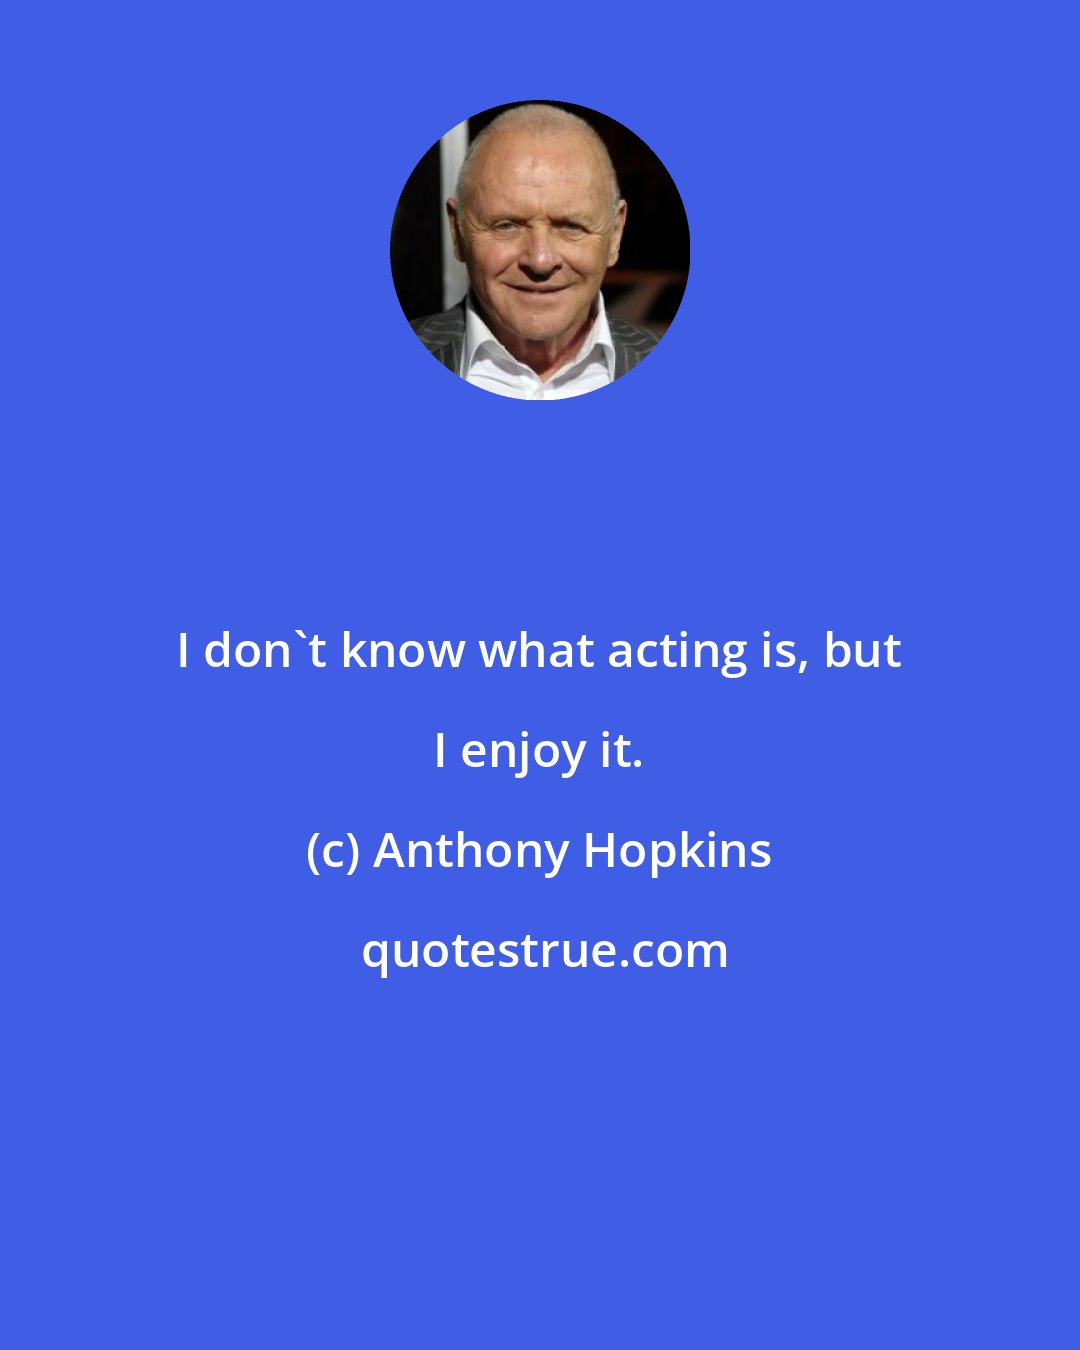 Anthony Hopkins: I don't know what acting is, but I enjoy it.